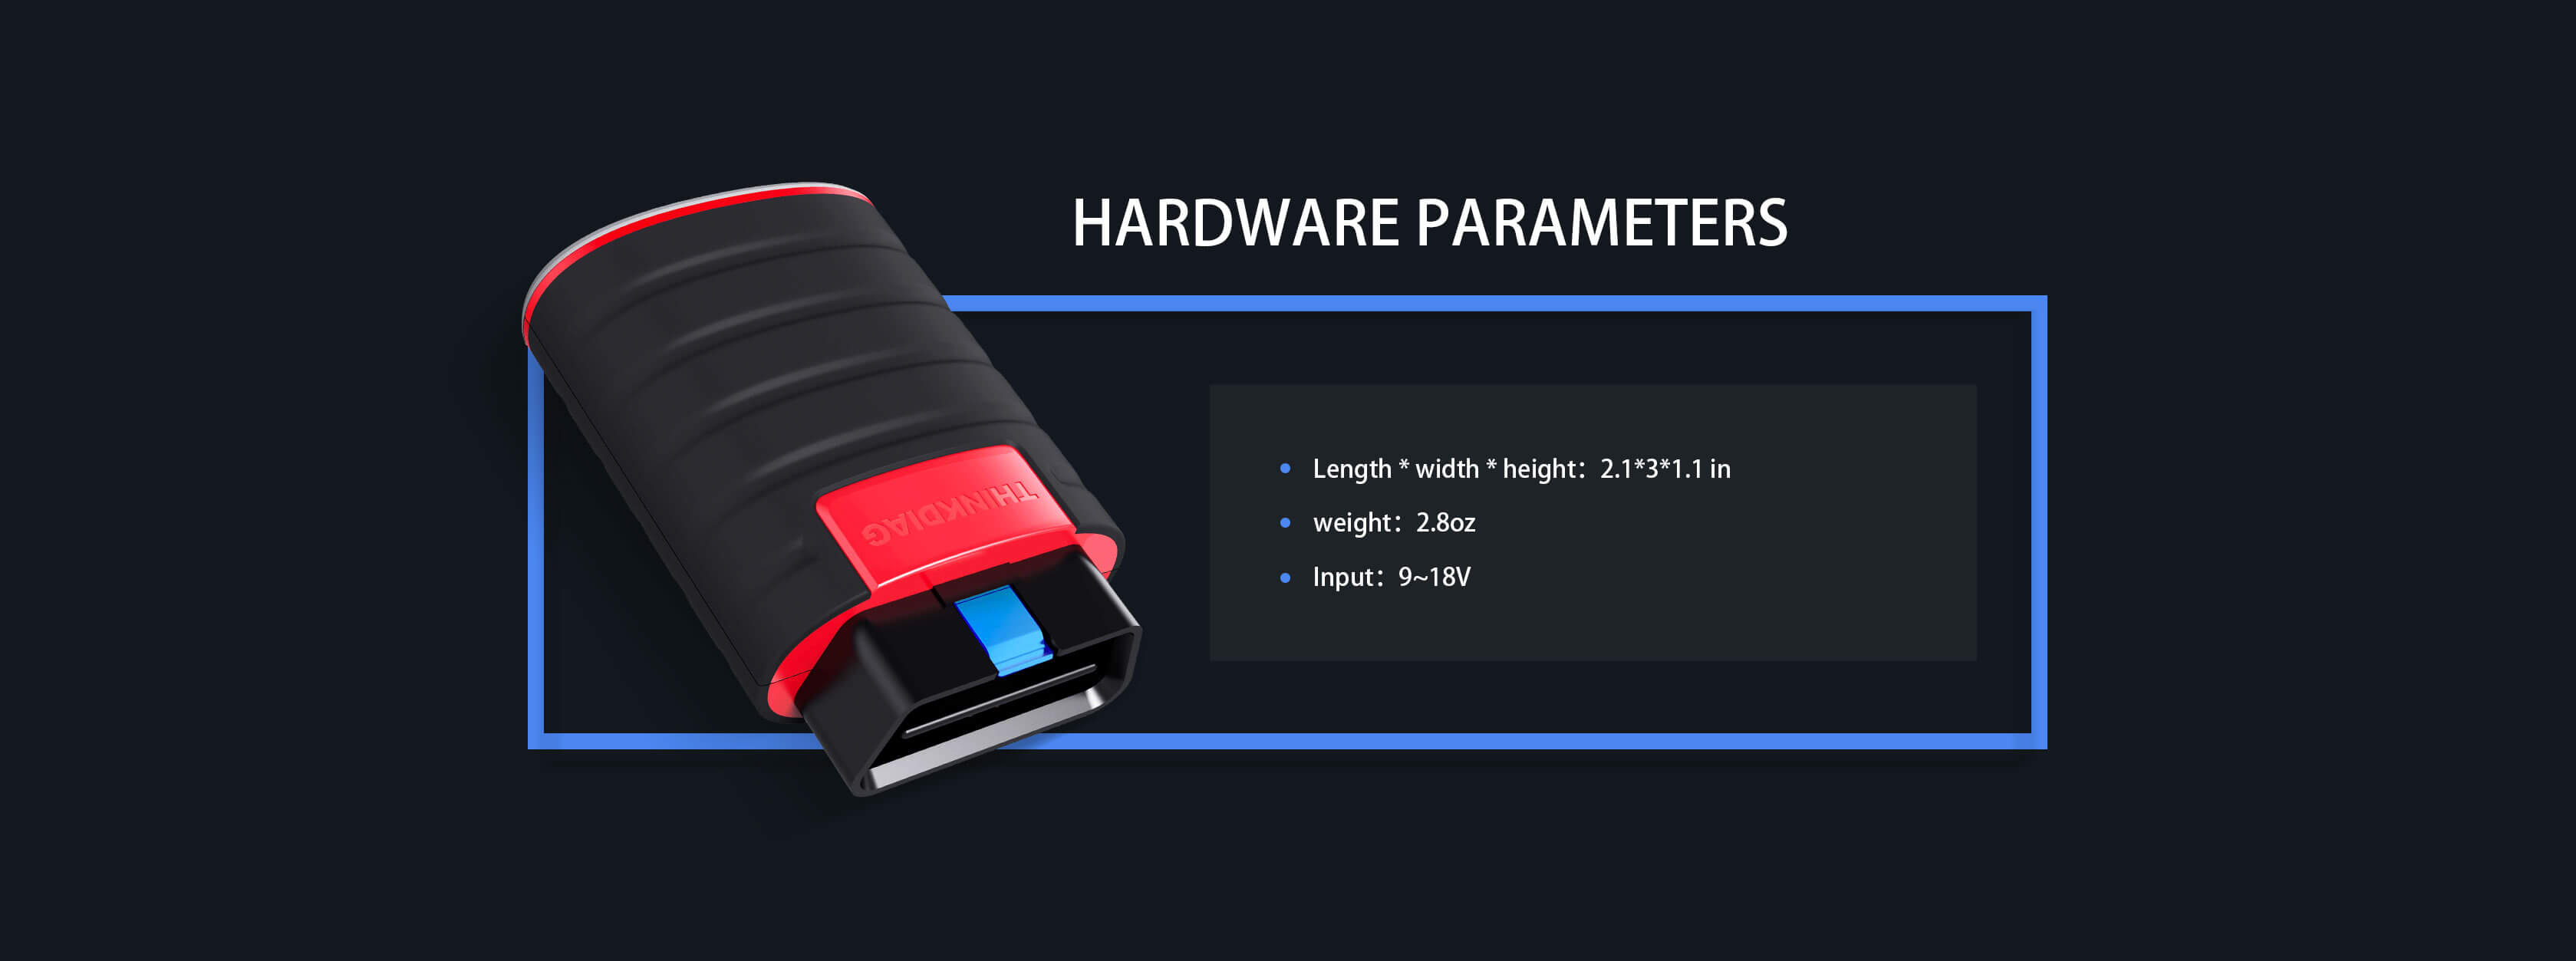 The ThinkDiag Hardware Parameters are Length 2.1*3*1.1 Weight 2.9oz Input: 9-18V.